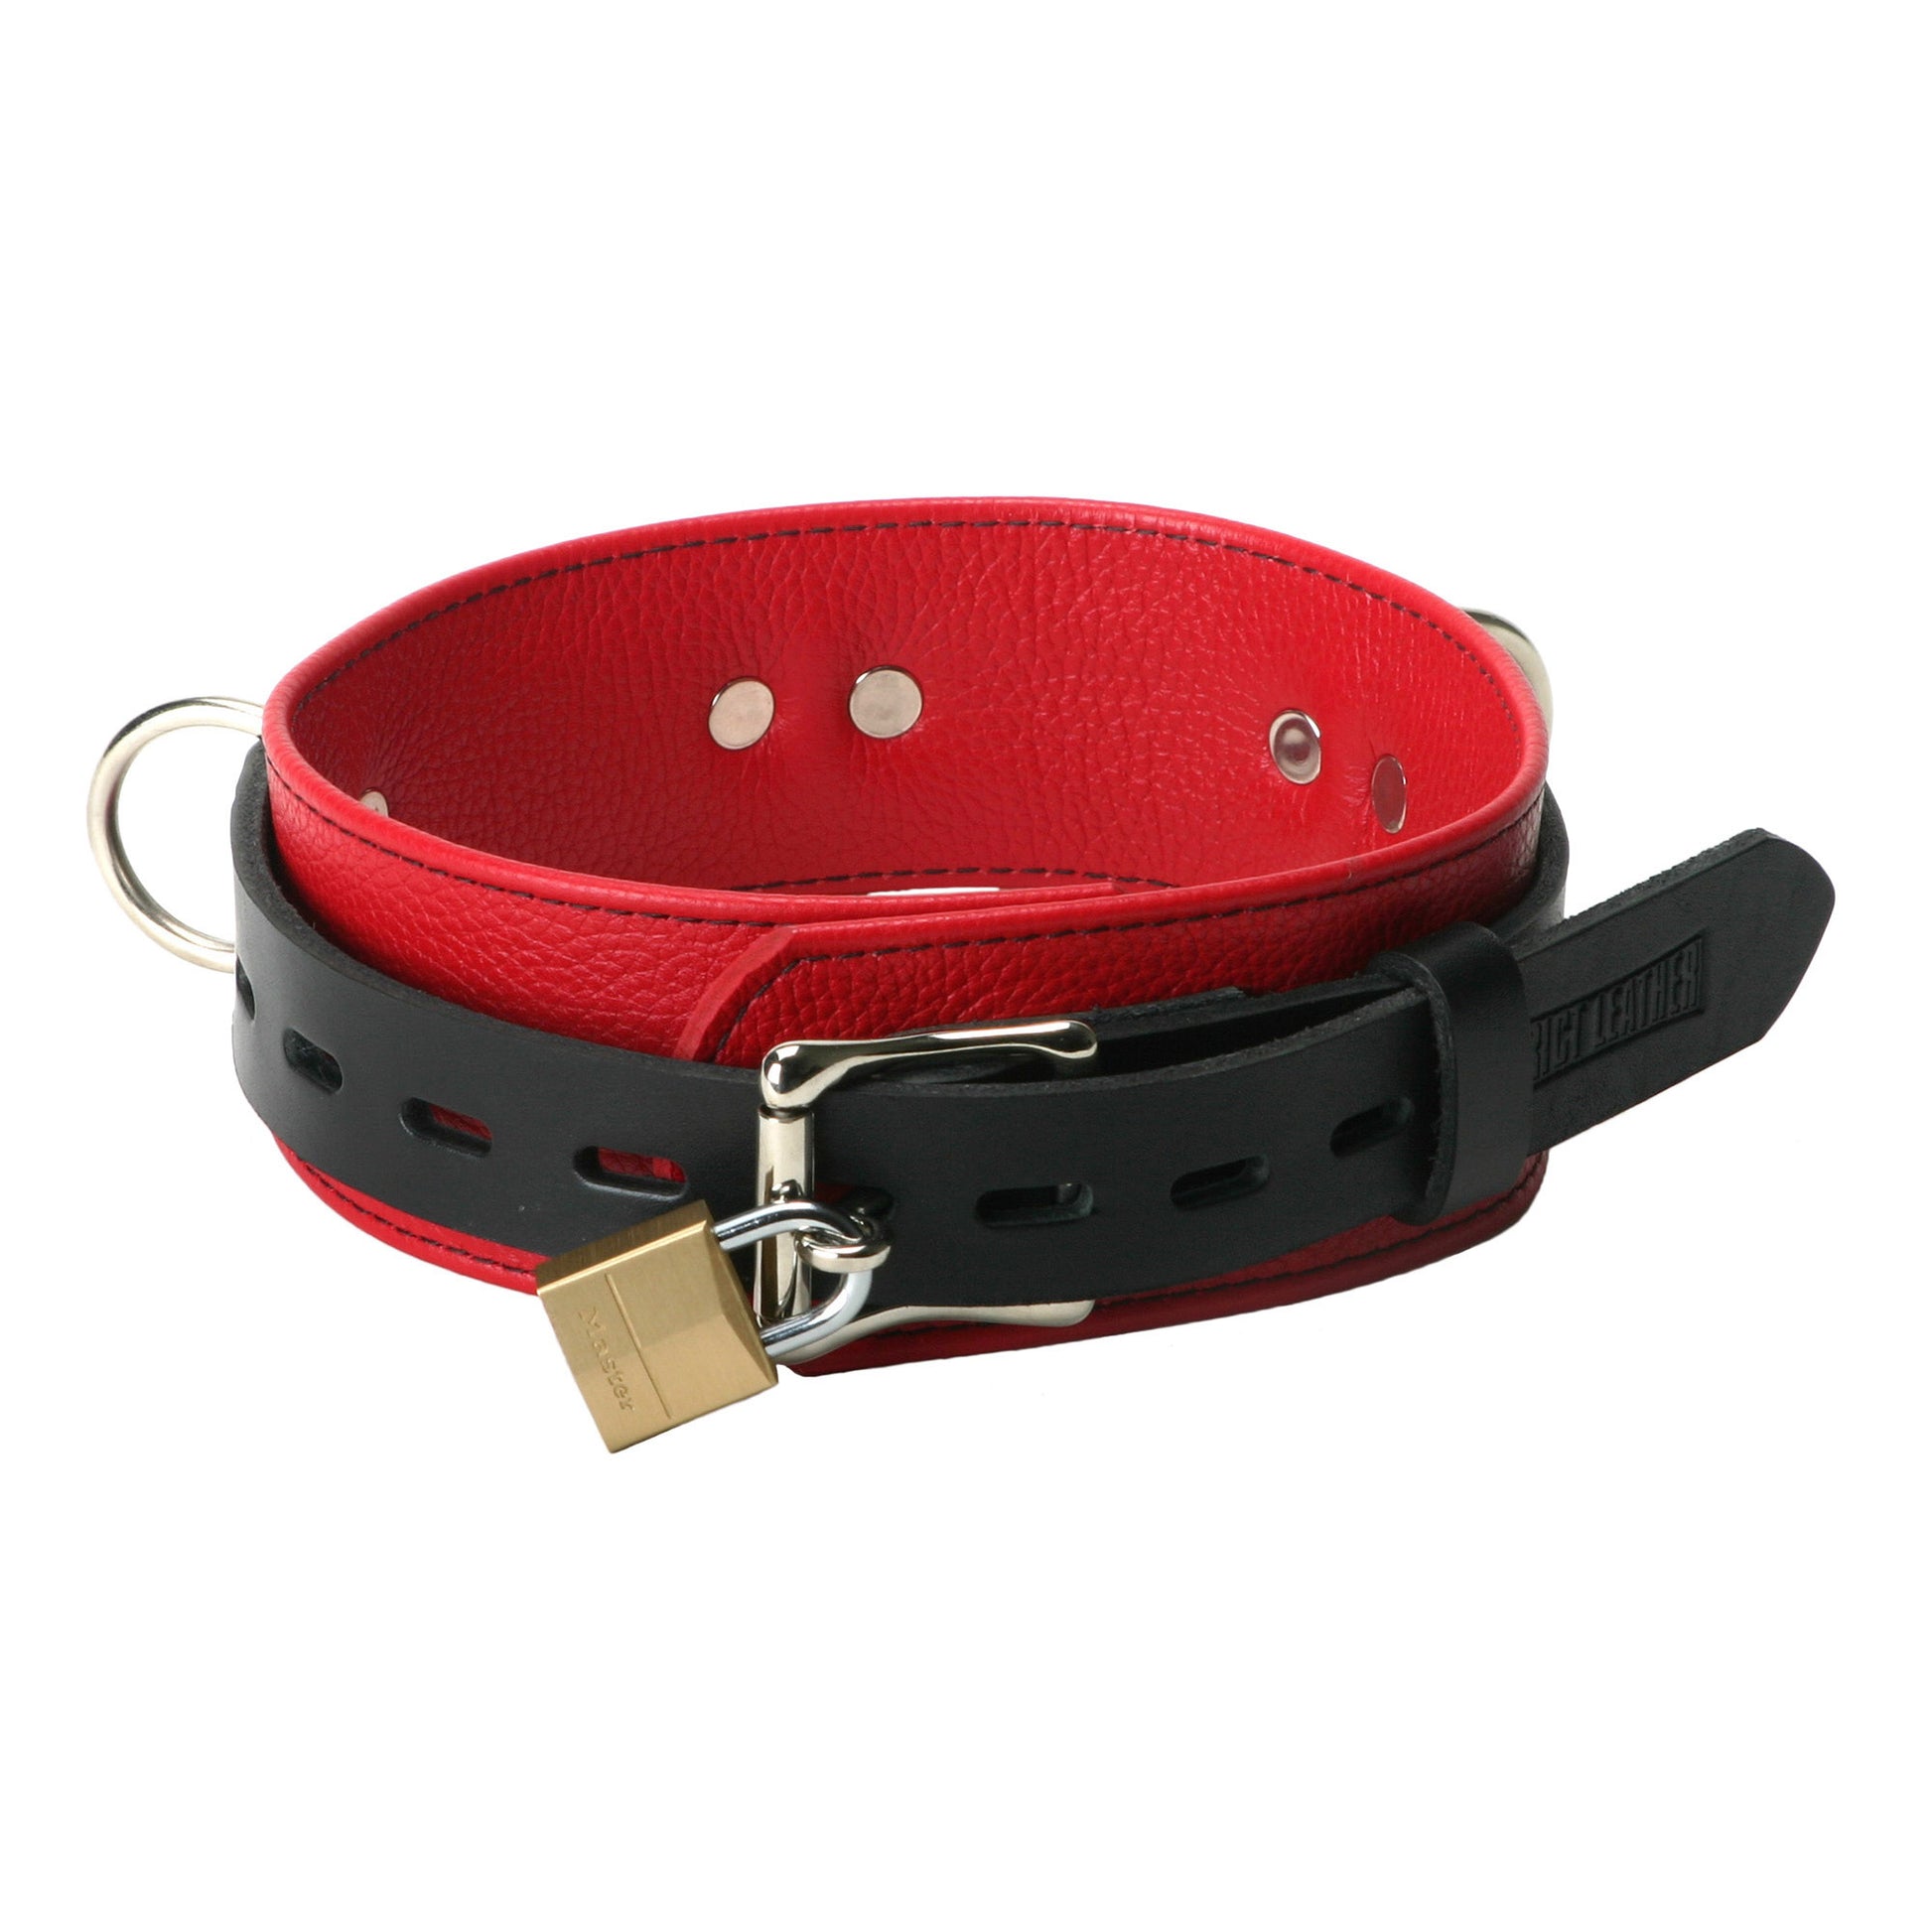 Strict Leather Deluxe Red and Black Locking Collar - UABDSM